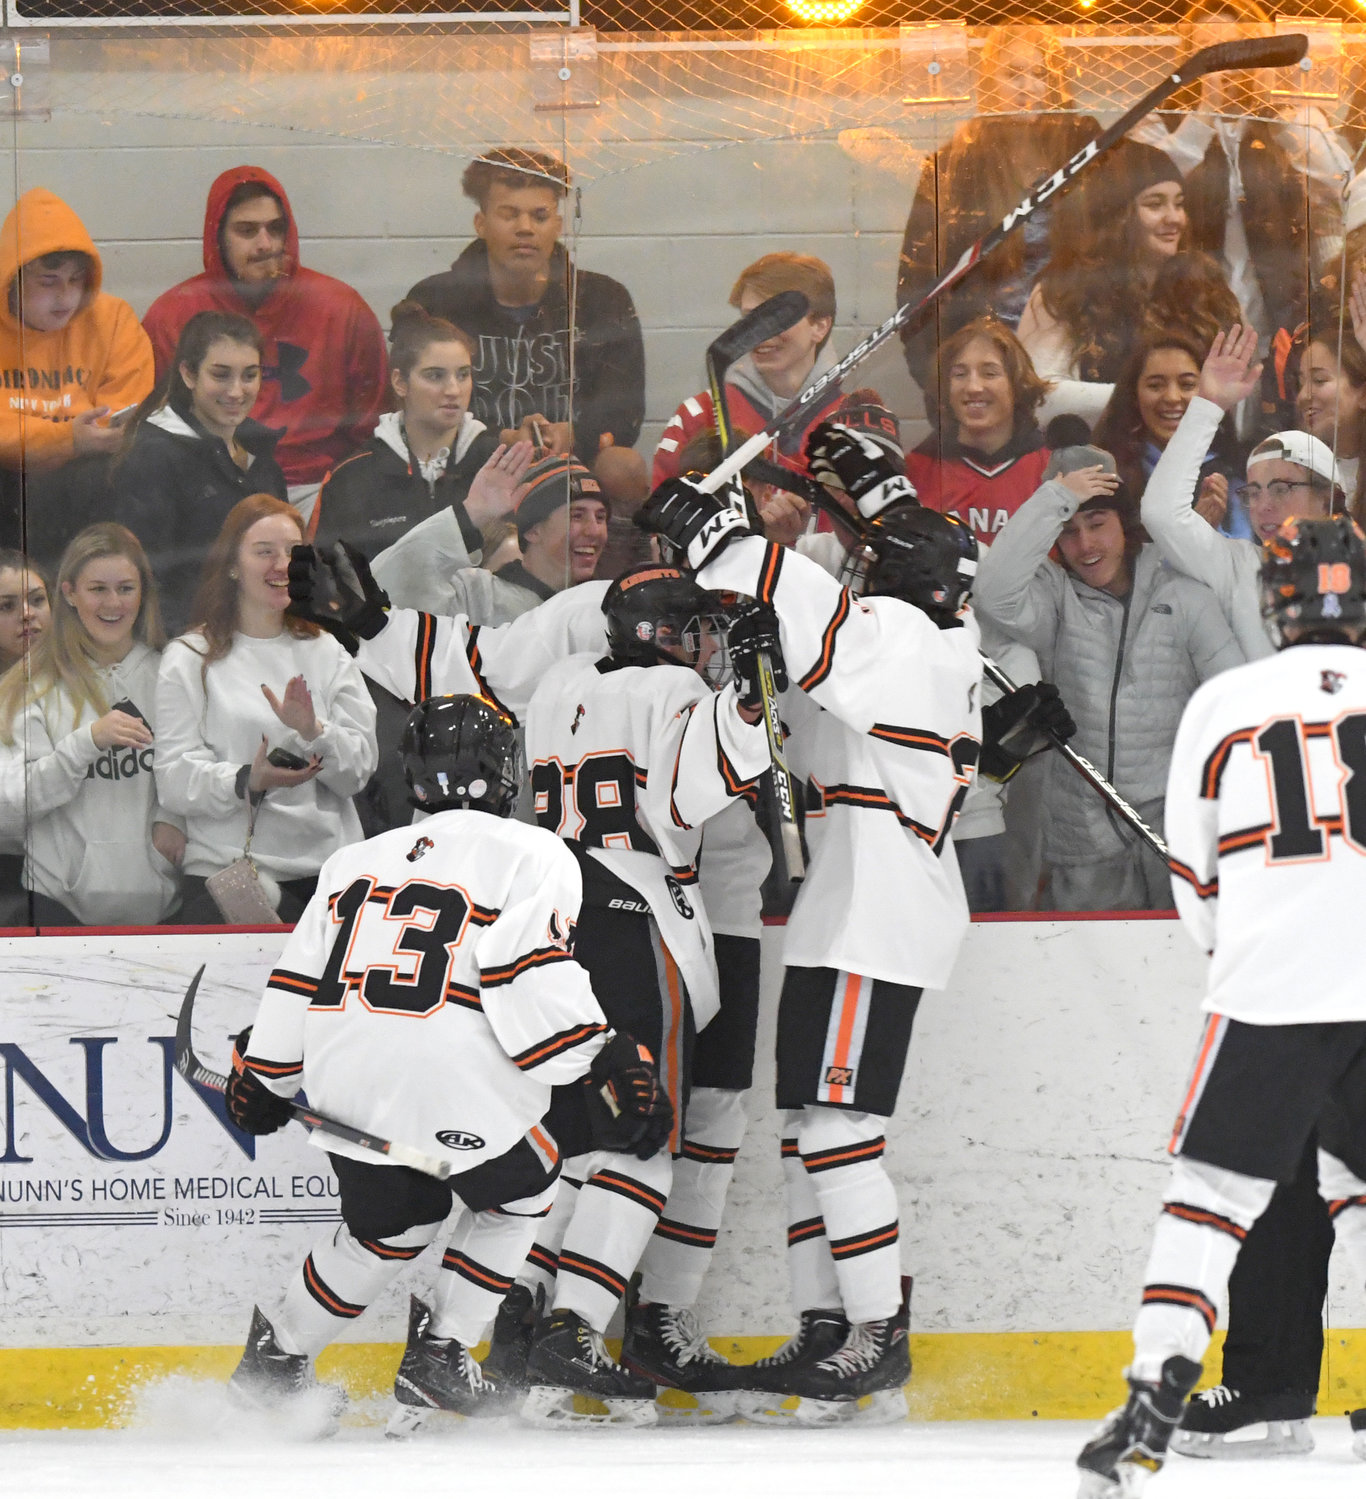 FIRST OF FIVE — Rome Free Academy hockey players celebrate the first goal of the game in their 5-2 win over Ithaca on Friday night at Kennedy Arena. Joey Gulla got the tally on an assist from Jake Hall.